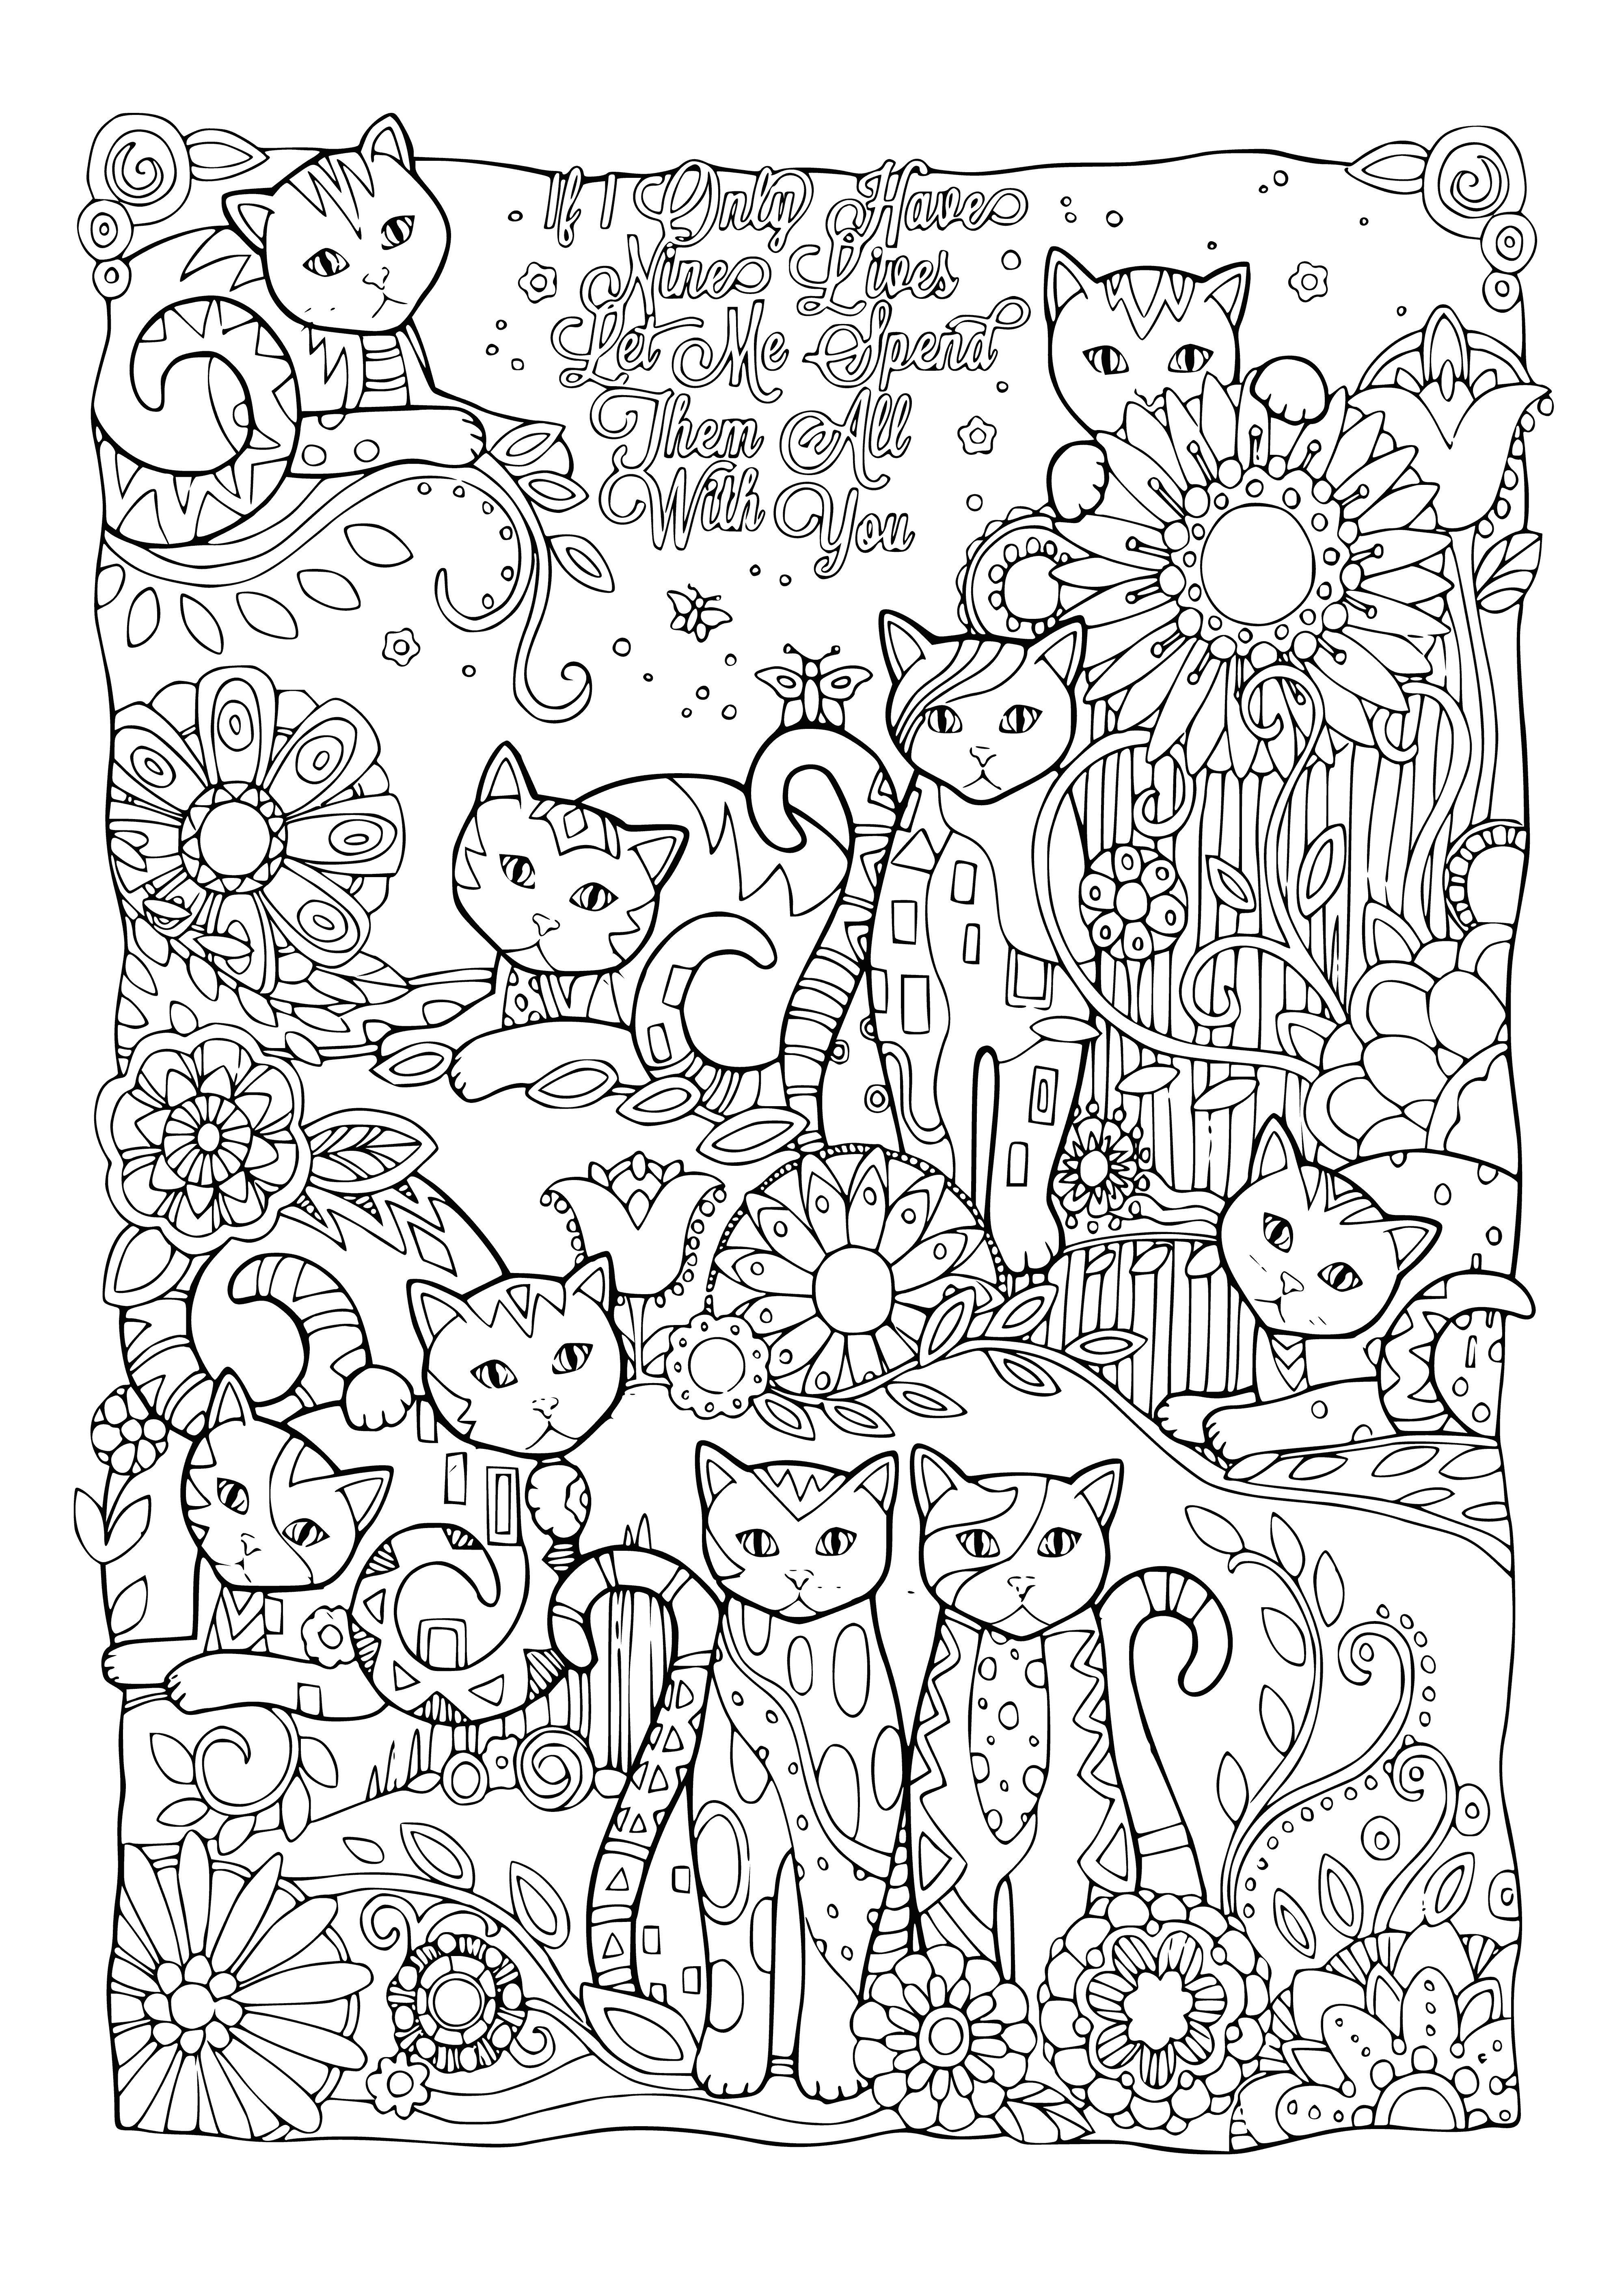 coloring page: 9 cats coloring page: sleeping/awake, in different colors. Have fun coloring! #coloringpages